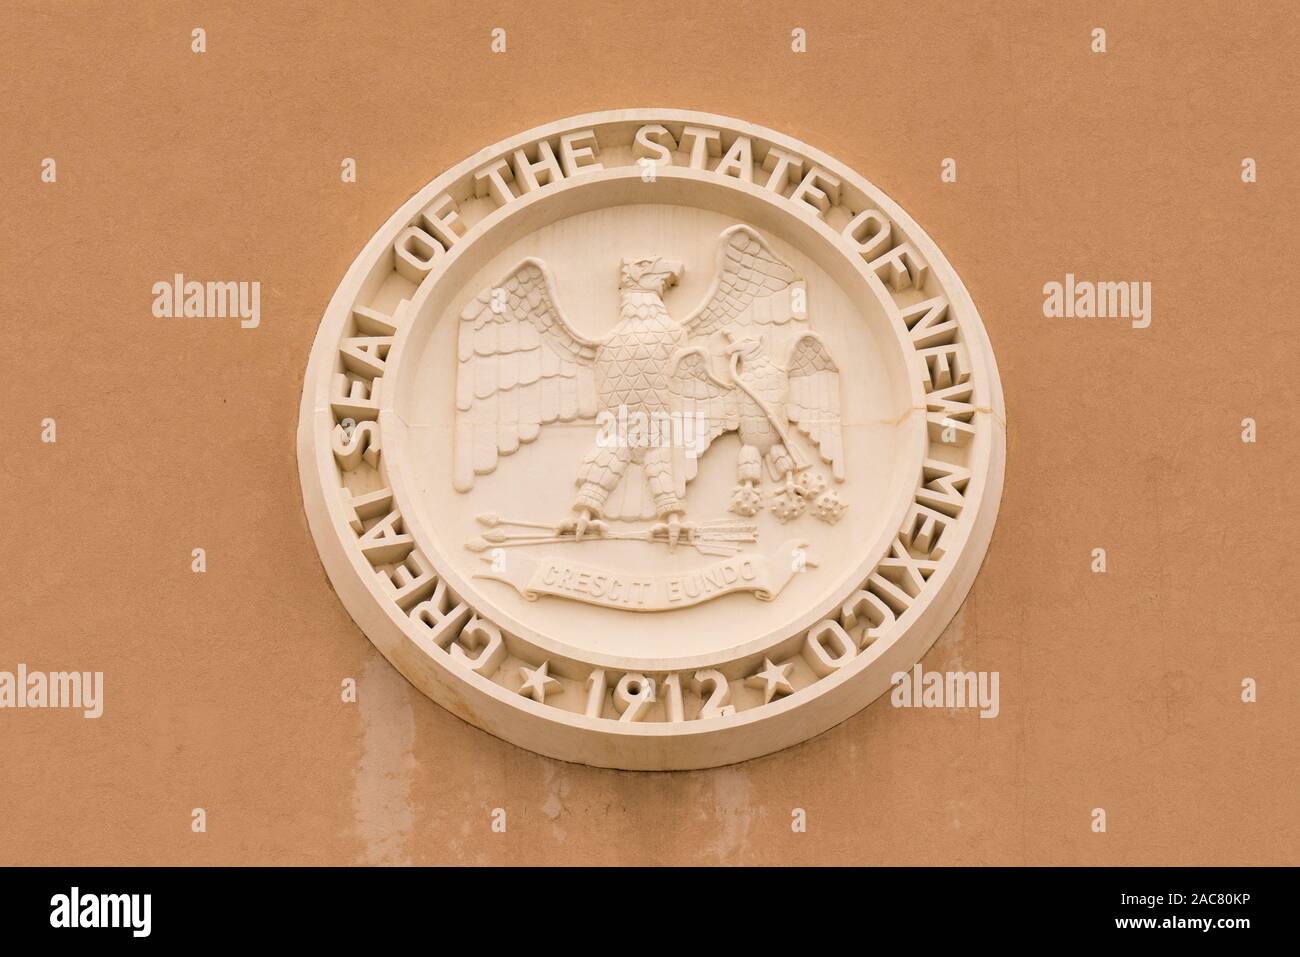 Santa Fe, New Mexico - October 4, 2019: State seal of New Mexico on the facade of the state capitol building Stock Photo